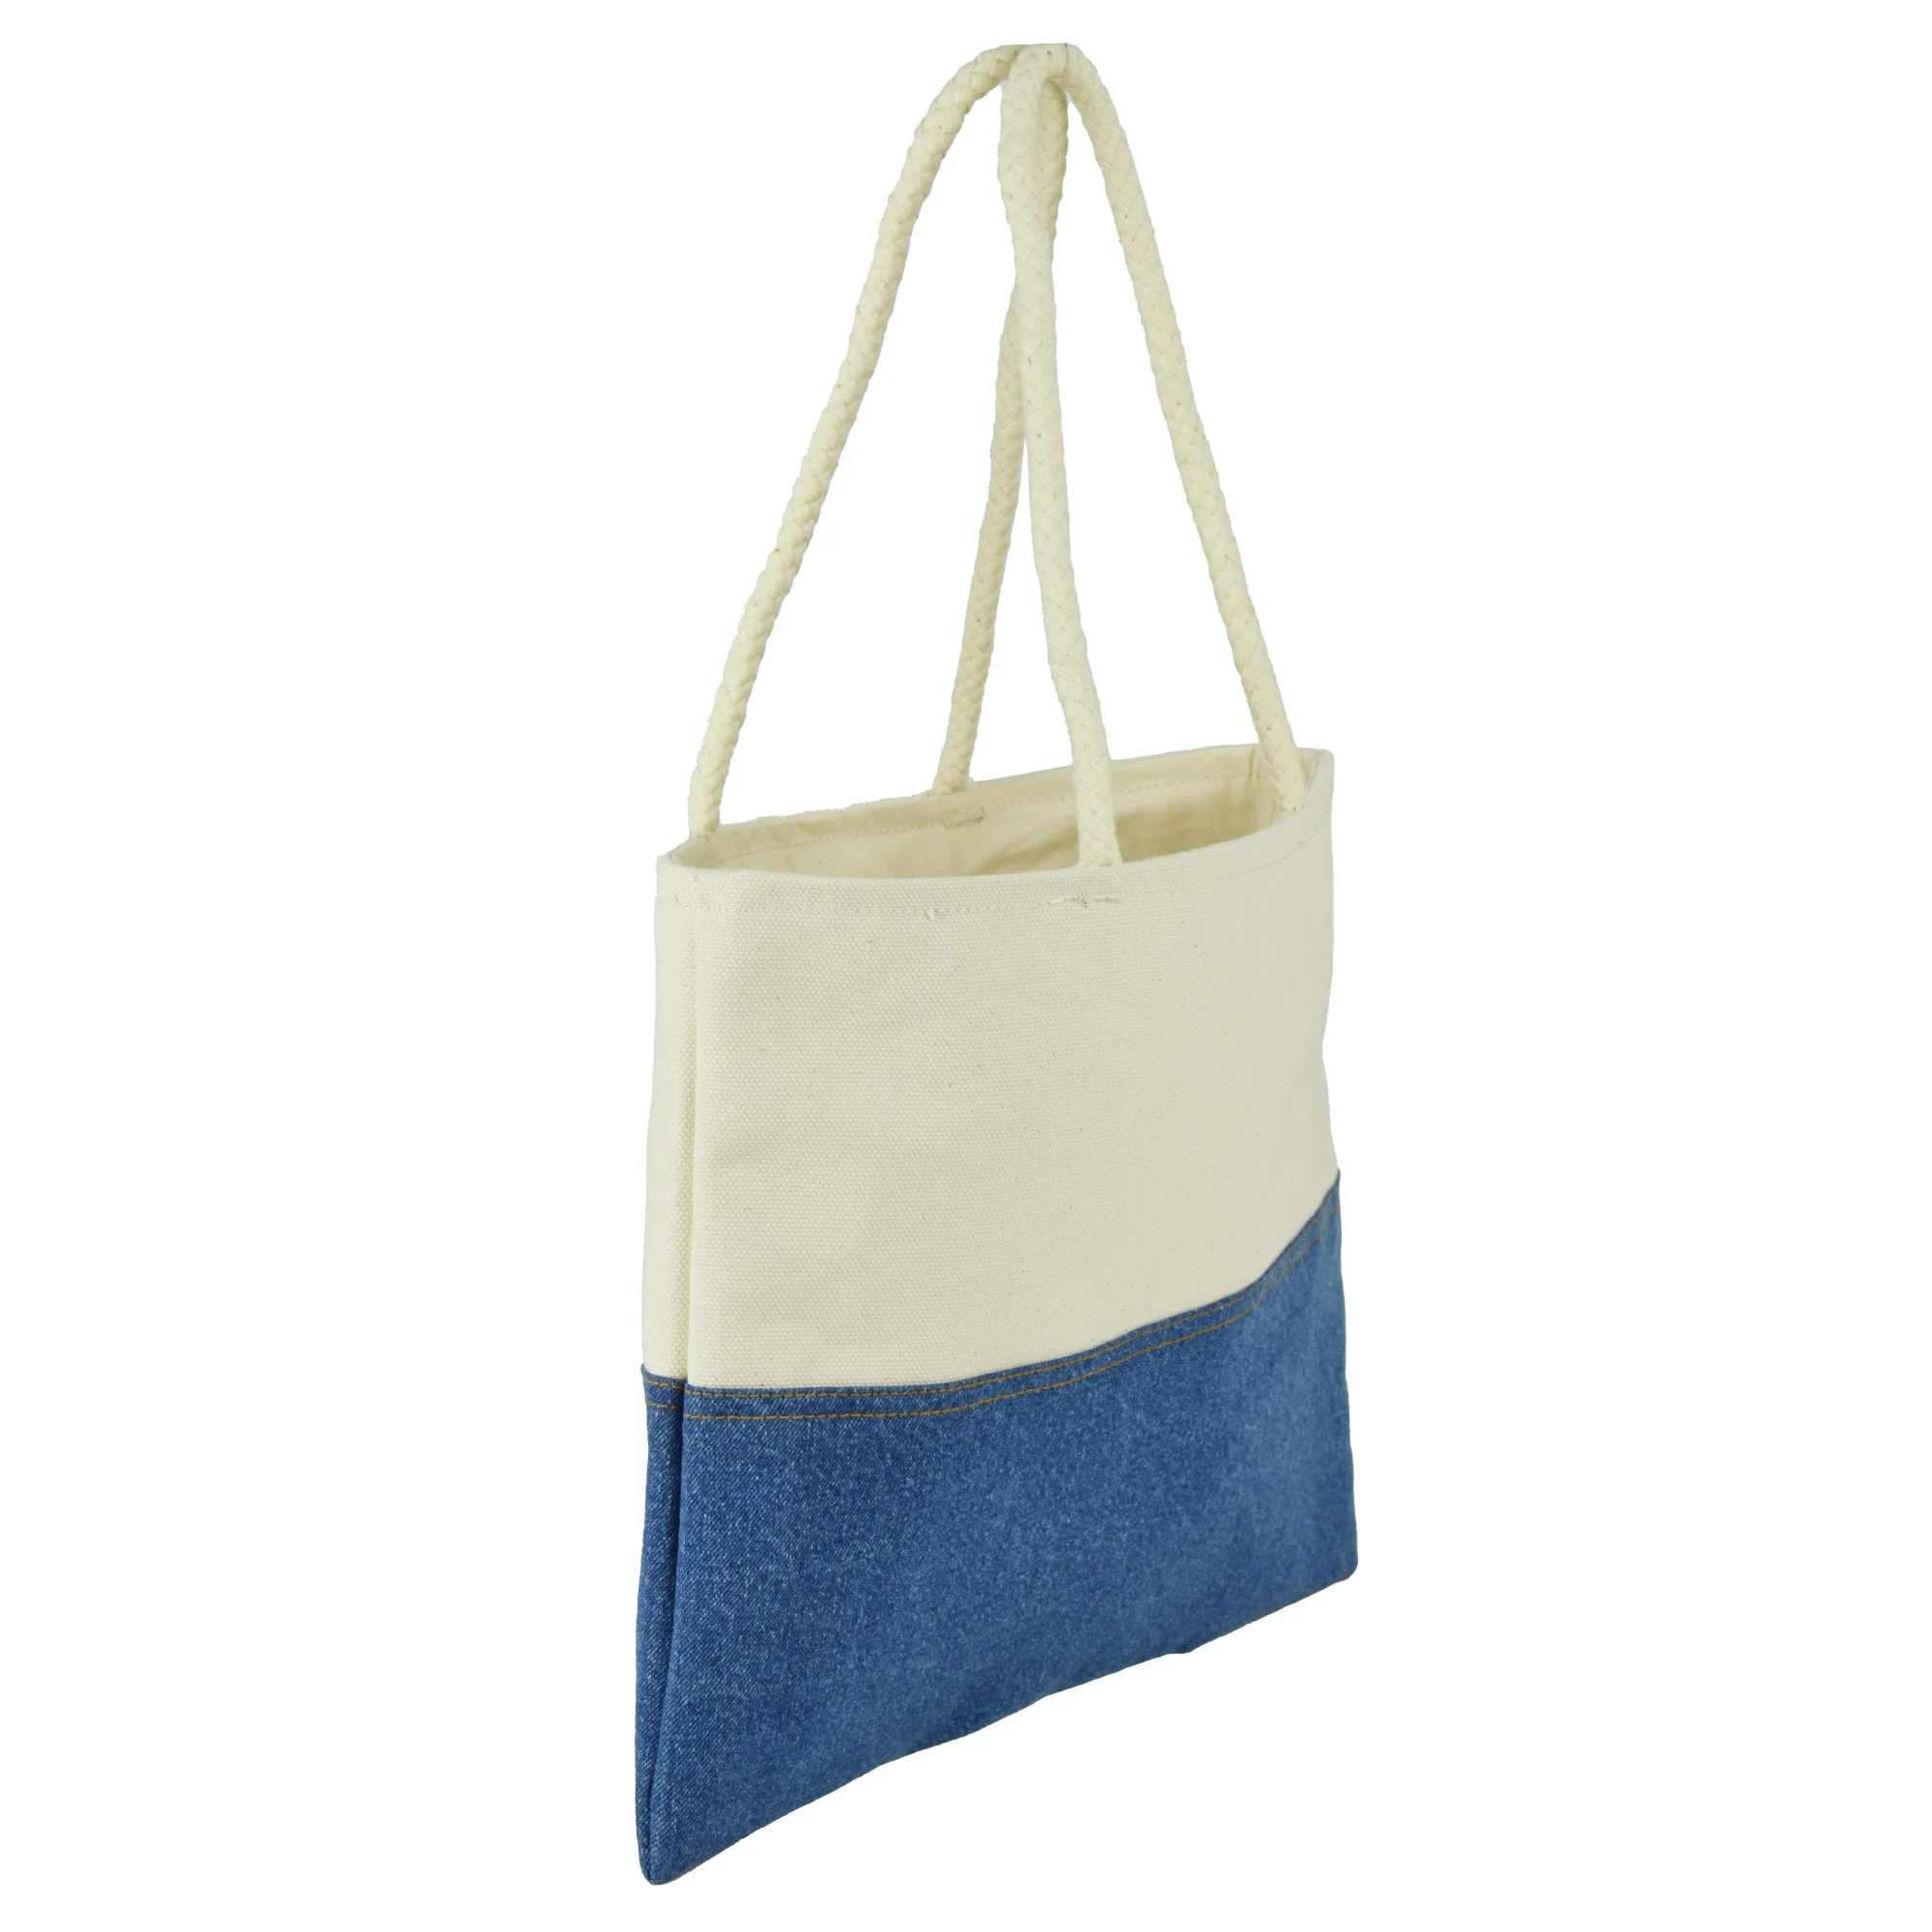 Cotton Tote Bags: Style, Sustainability, and Wholesale Options - BagzDepot